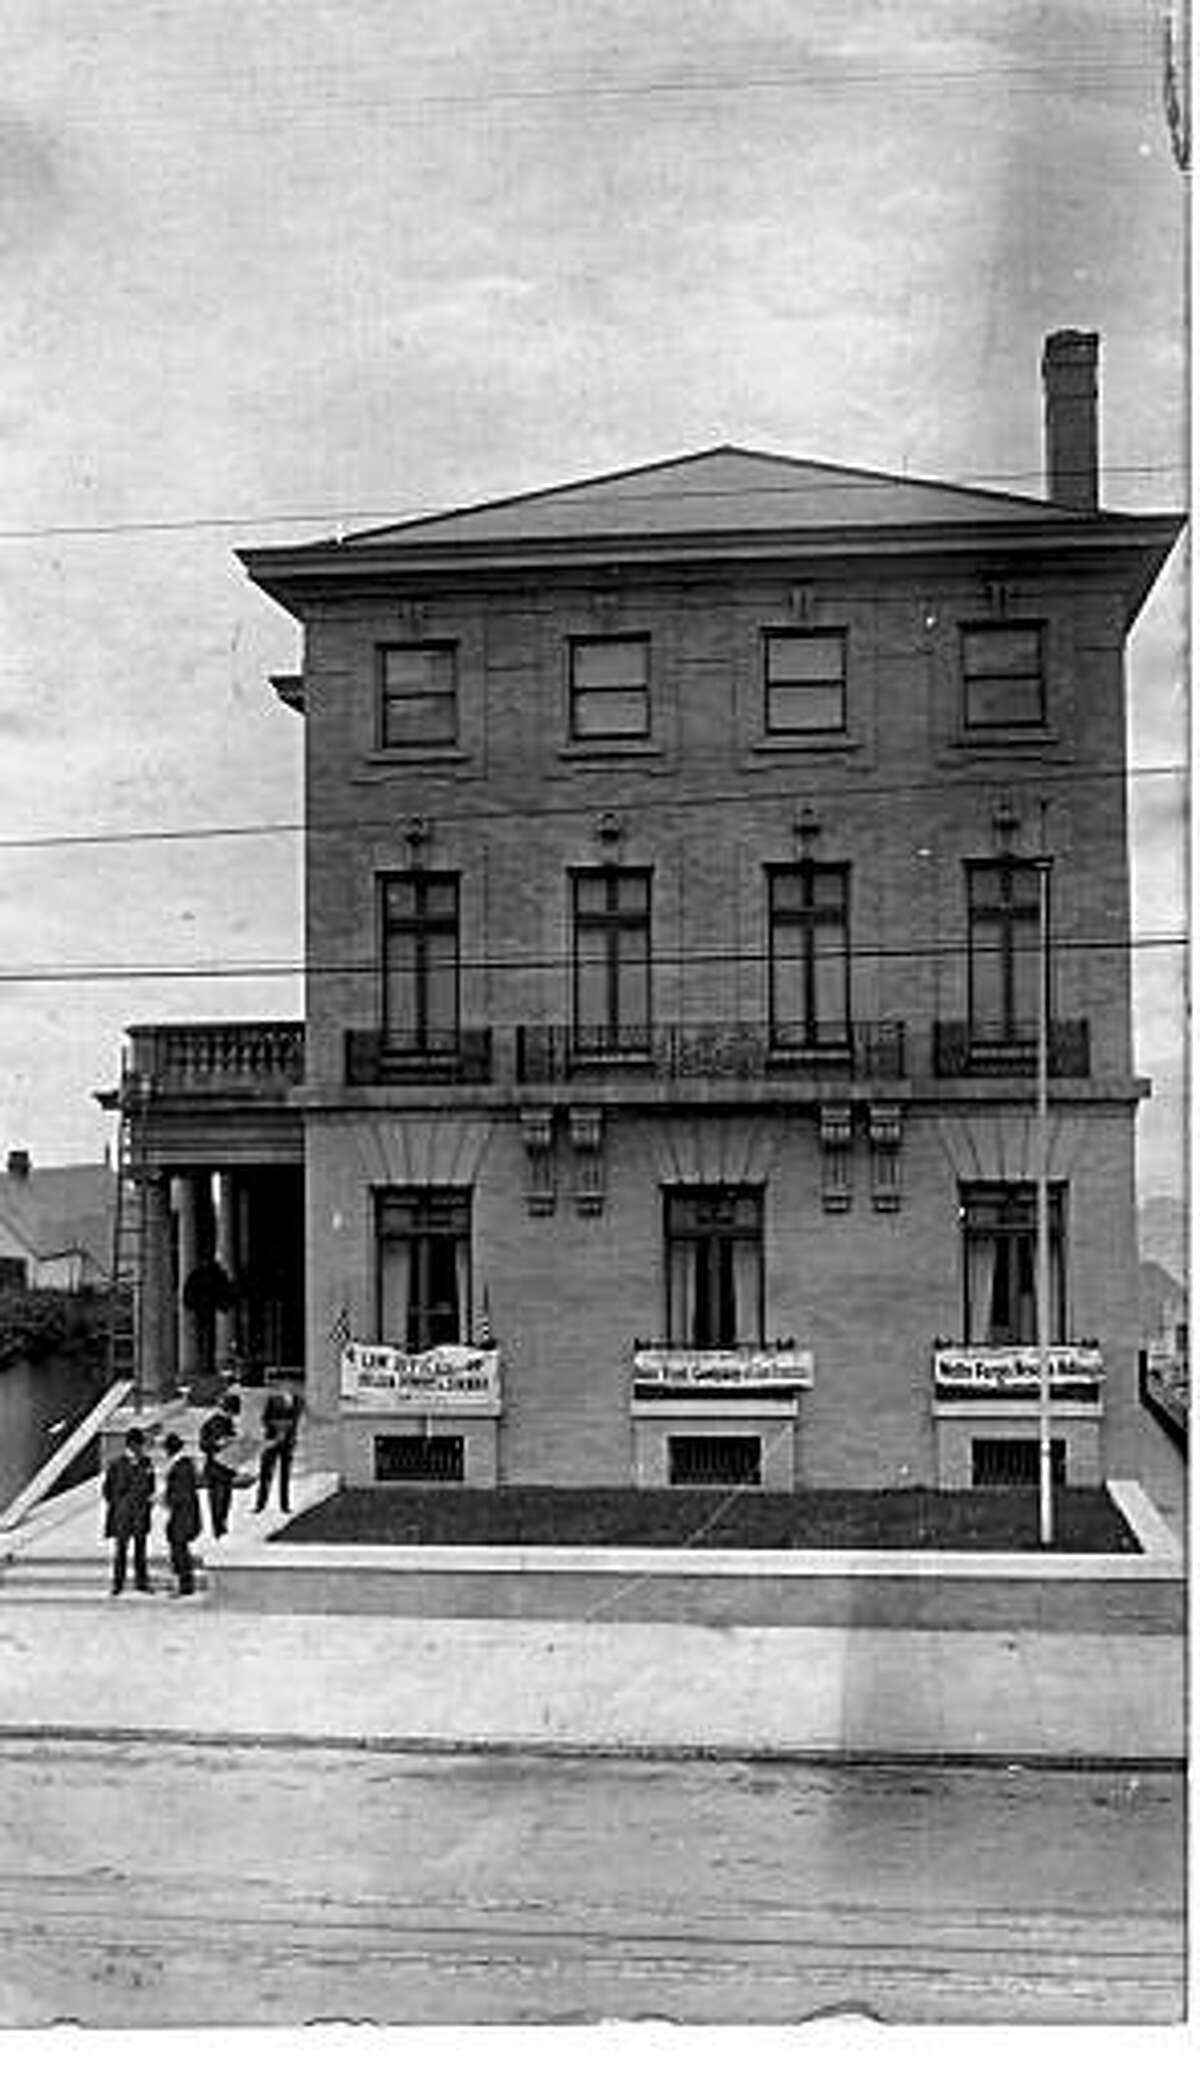 Wells Fargo Nevada National Bank and the Union Trust Company relocated after the 1906 San Francisco fire and earthquake to 2020 Jackson St., the home of Emanuel Heller. The law offices of Heller Ehrman also squeeaed into the home.